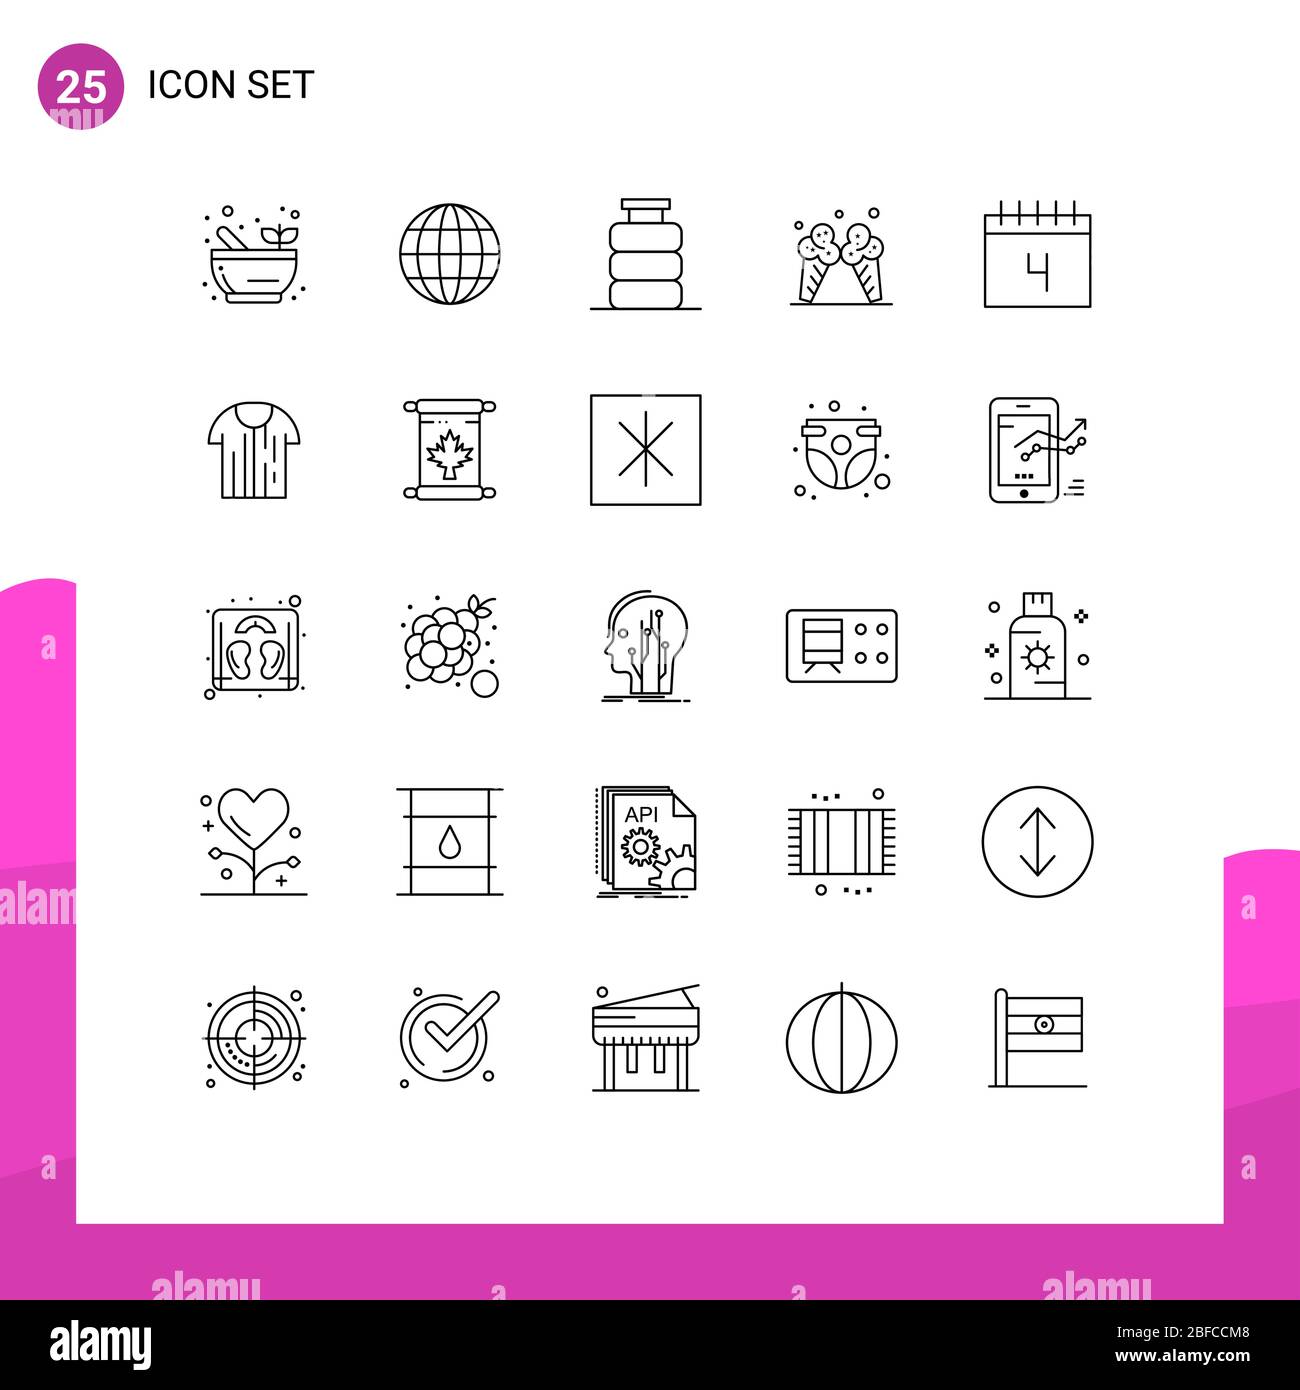 25 Creative Icons Modern Signs and Symbols of schedule, calendar, dinner, american, ice Editable Vector Design Elements Stock Vector